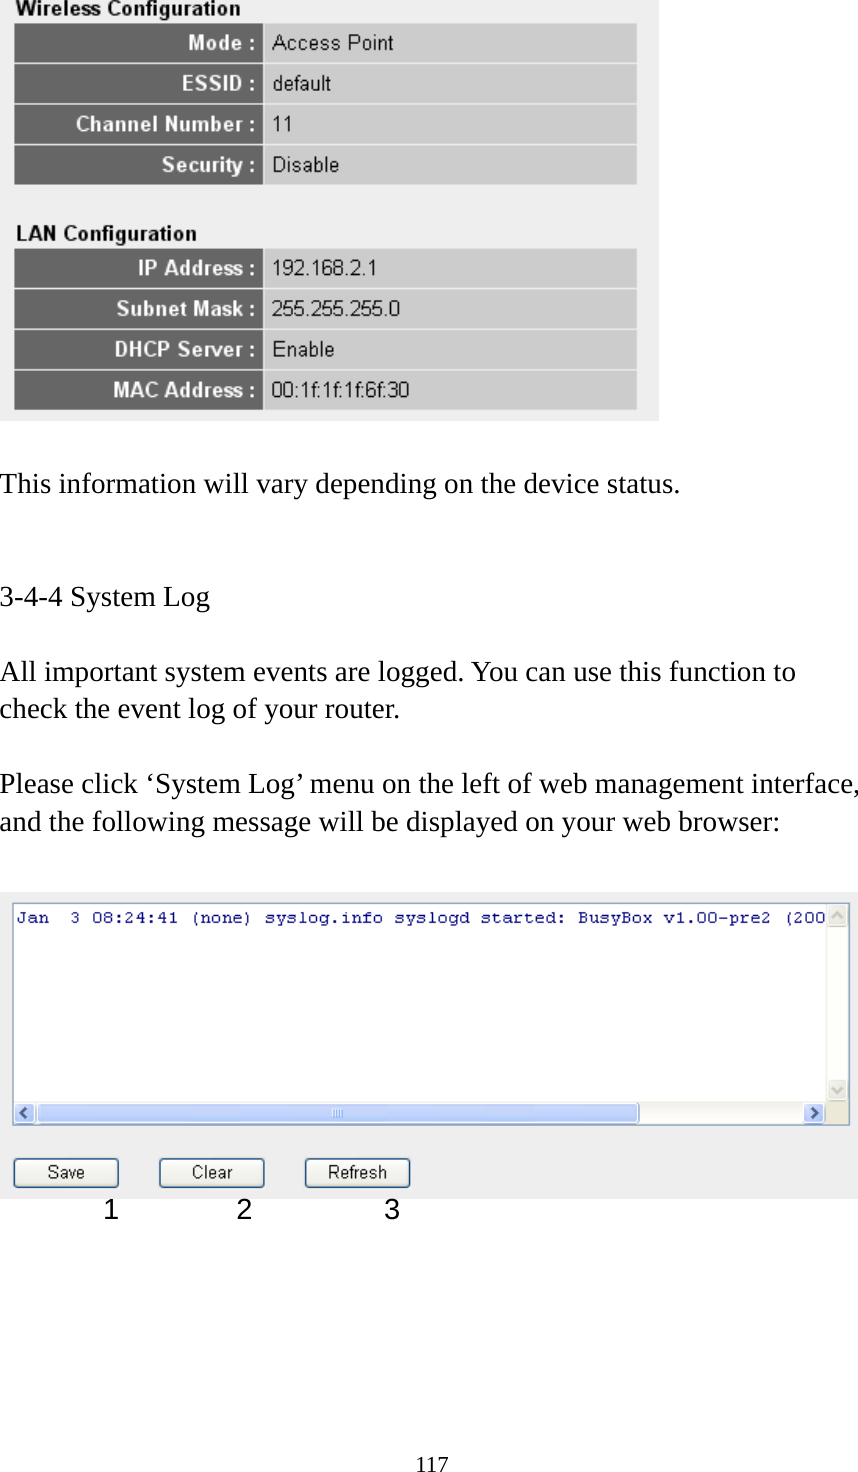 117   This information will vary depending on the device status.   3-4-4 System Log  All important system events are logged. You can use this function to check the event log of your router.  Please click ‘System Log’ menu on the left of web management interface, and the following message will be displayed on your web browser:        1 2  3